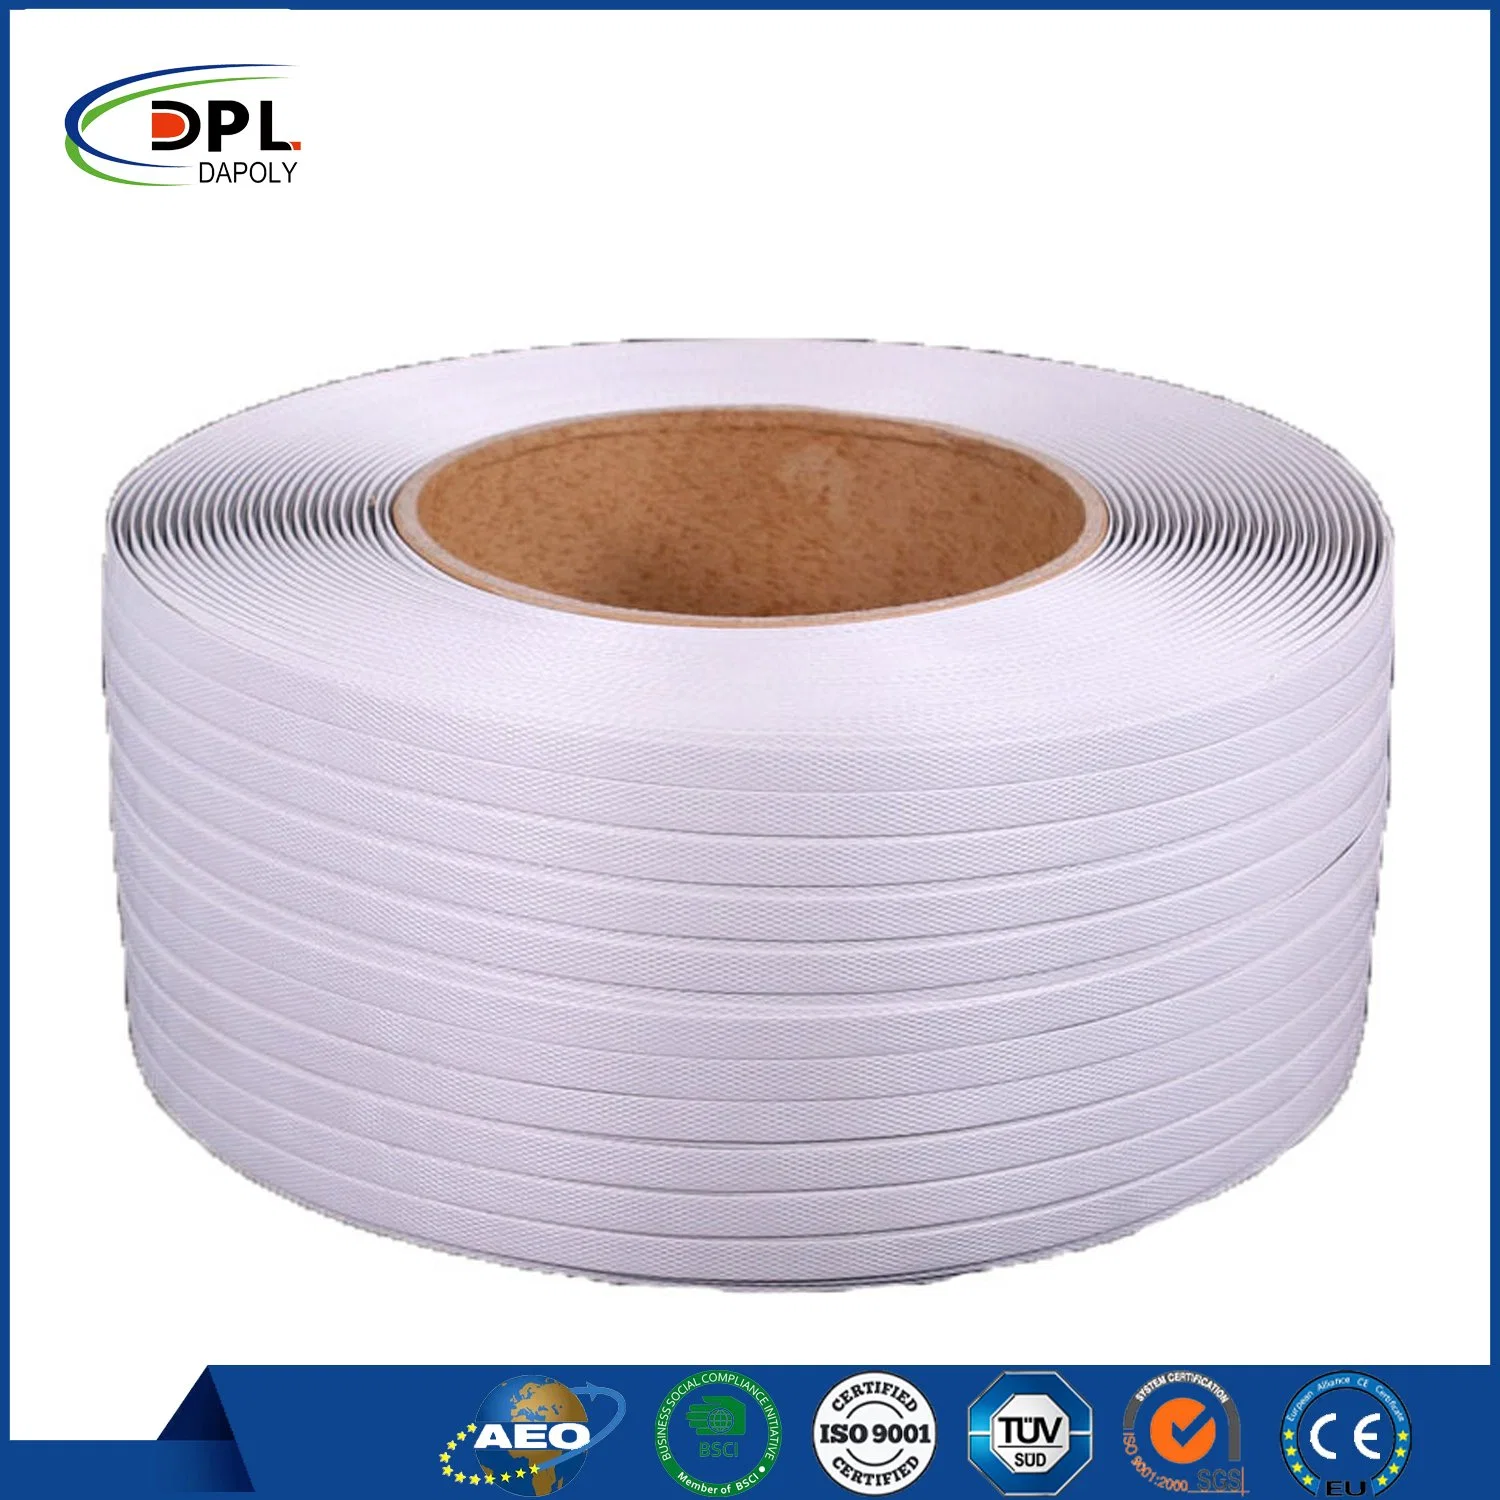 New Plastic Materials PP High quality/High cost performance Packing Strapping Belt / Band / Tape Good Sell